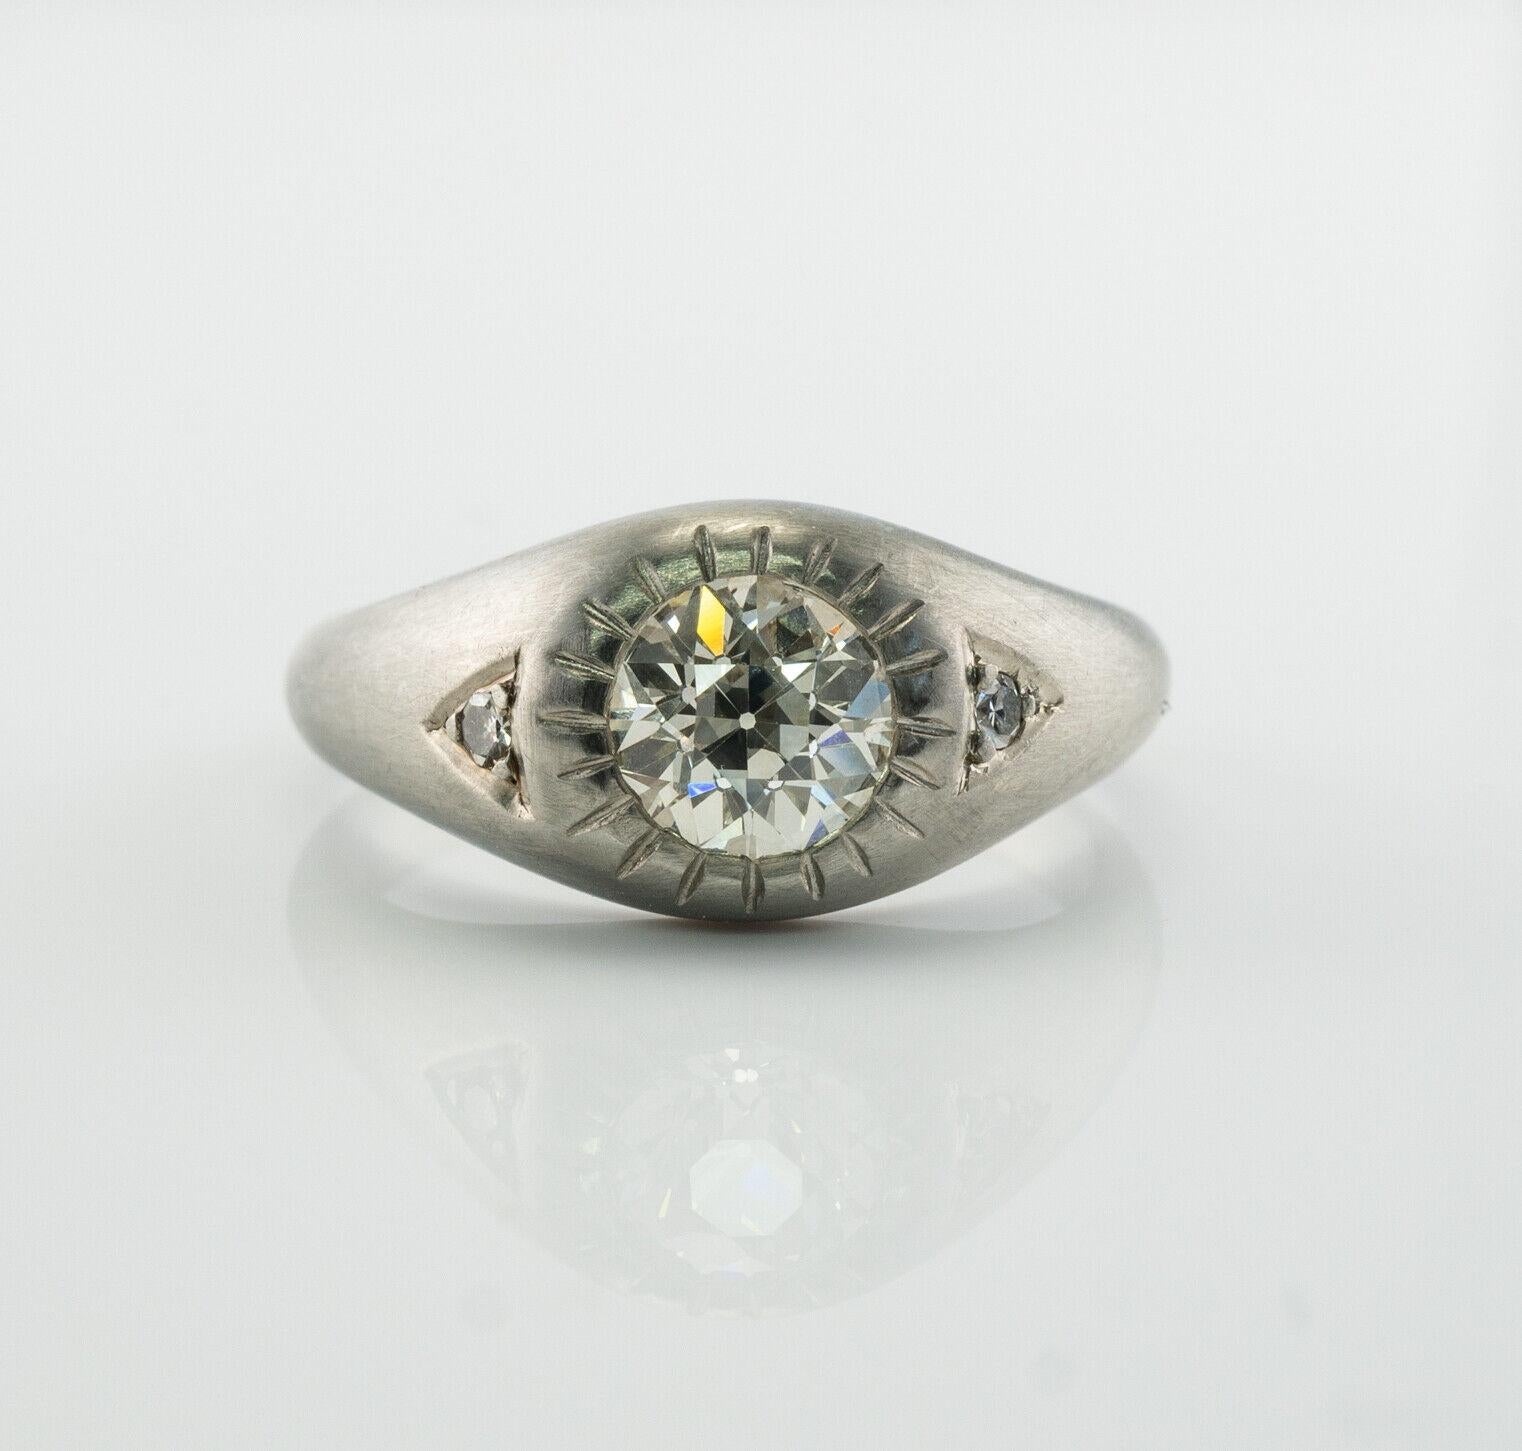 This stunning vintage circa 1940s ring is finely crafted in solid 18K White gold and set with natural Old mine cut diamond in the center and two single cut diamonds on the sides. The center gem is 1.00 carat of VS1 clarity and IJ color. Two sides